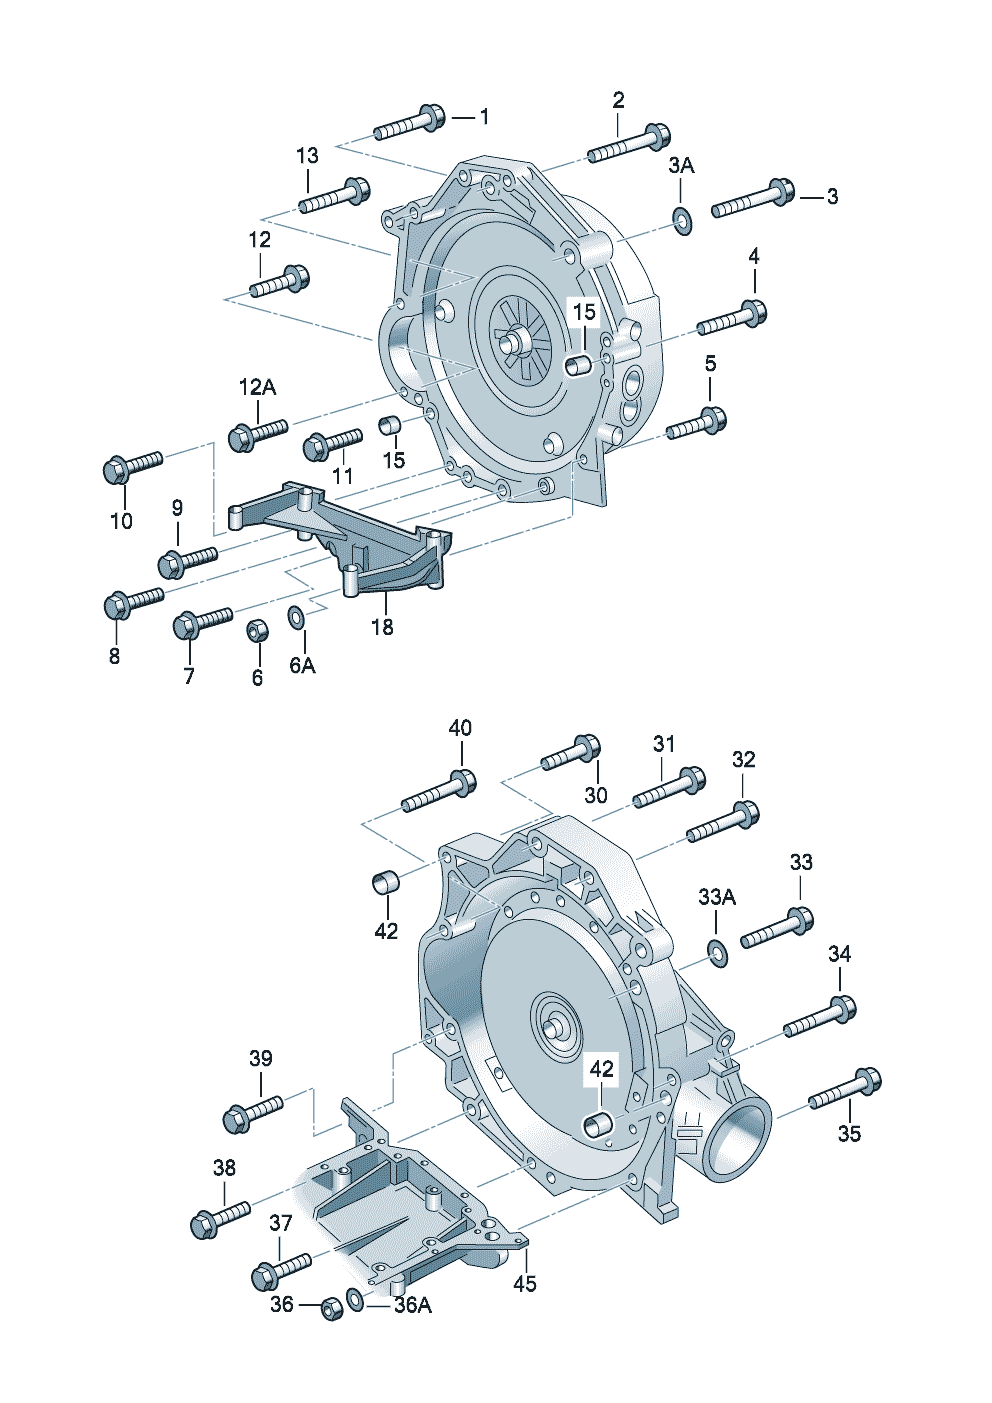 mounting parts for engine and<br>transmissionfor 5-speed automatic gearbox 6-cylinder - Audi A4/Avant - a4